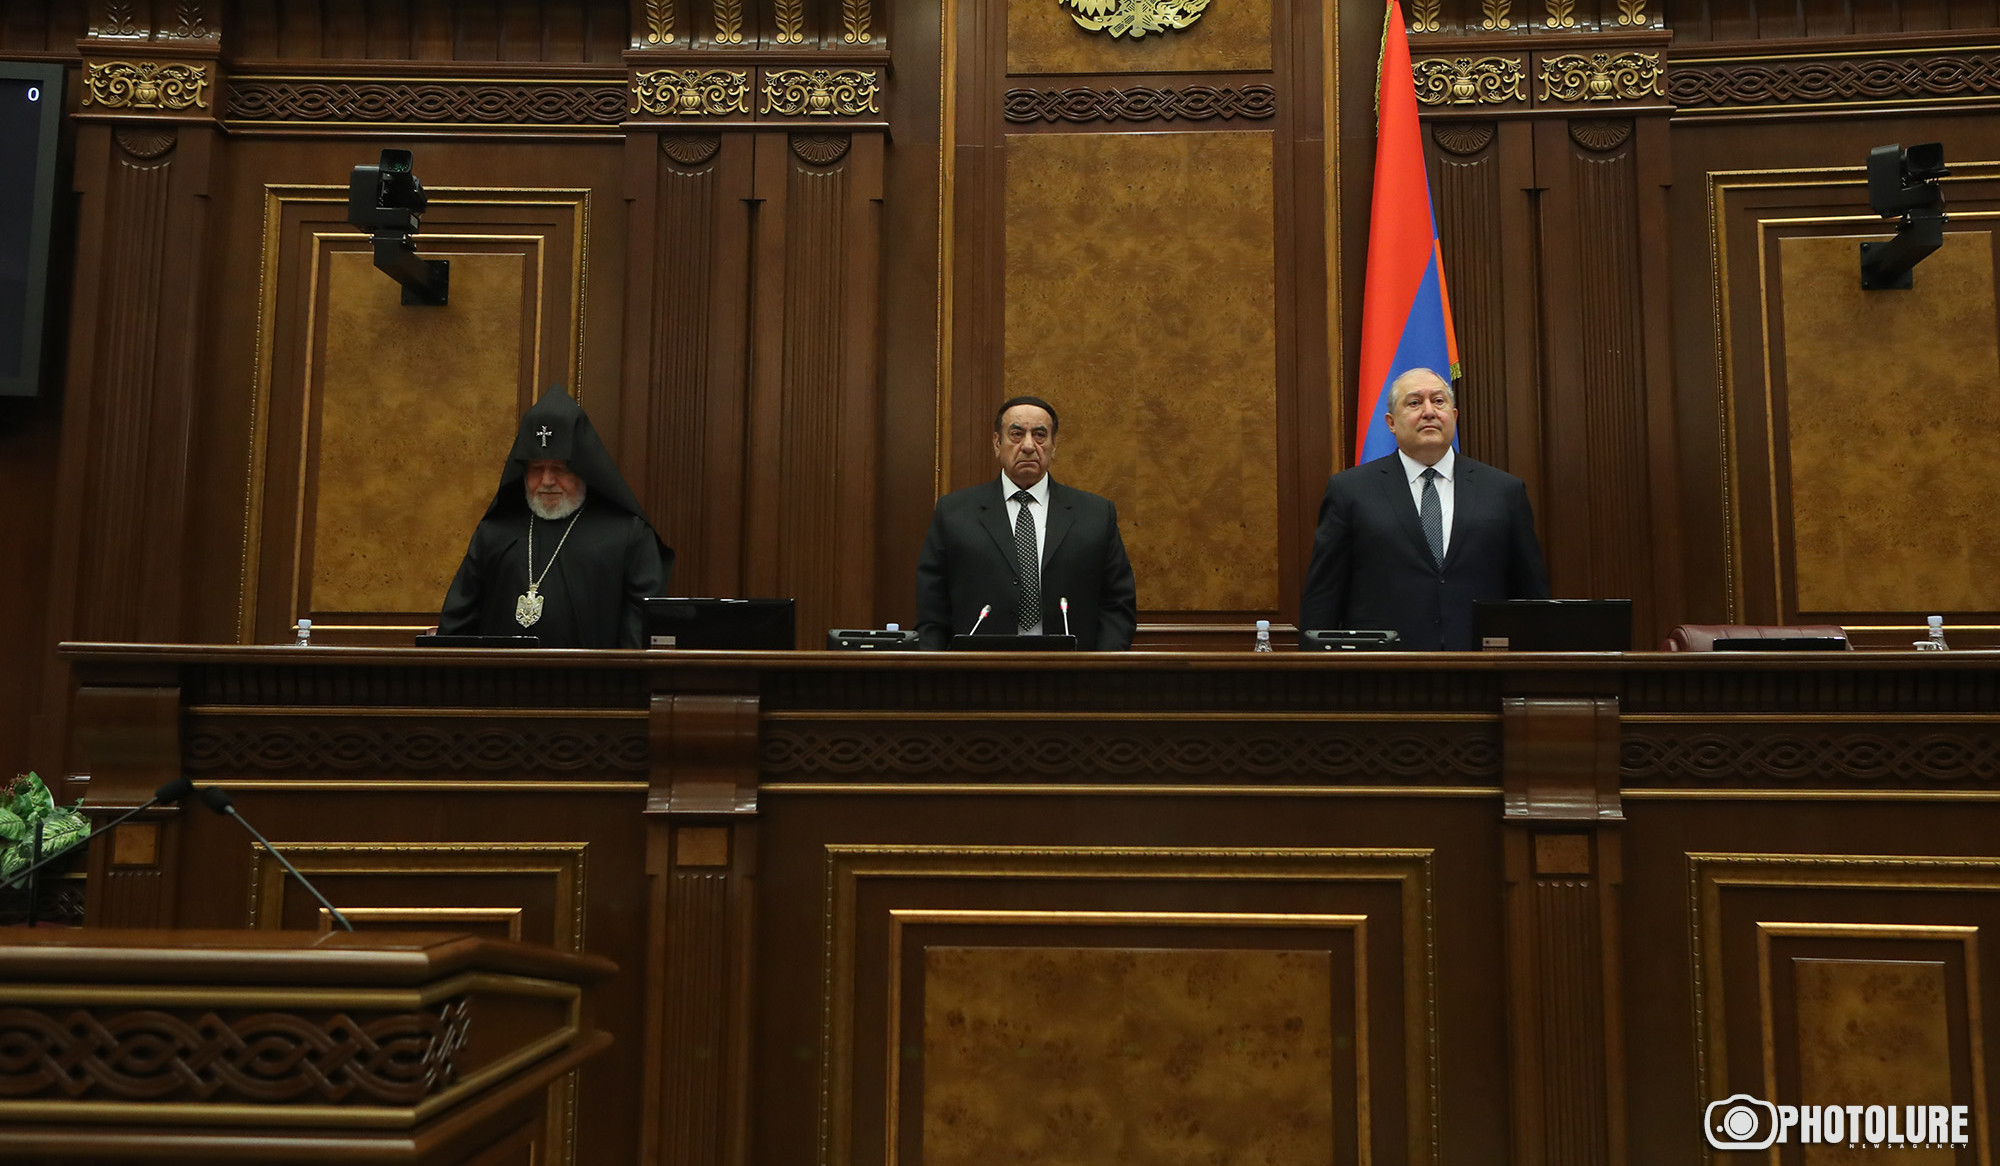 First session of newly elected Parliament started: deputies swore